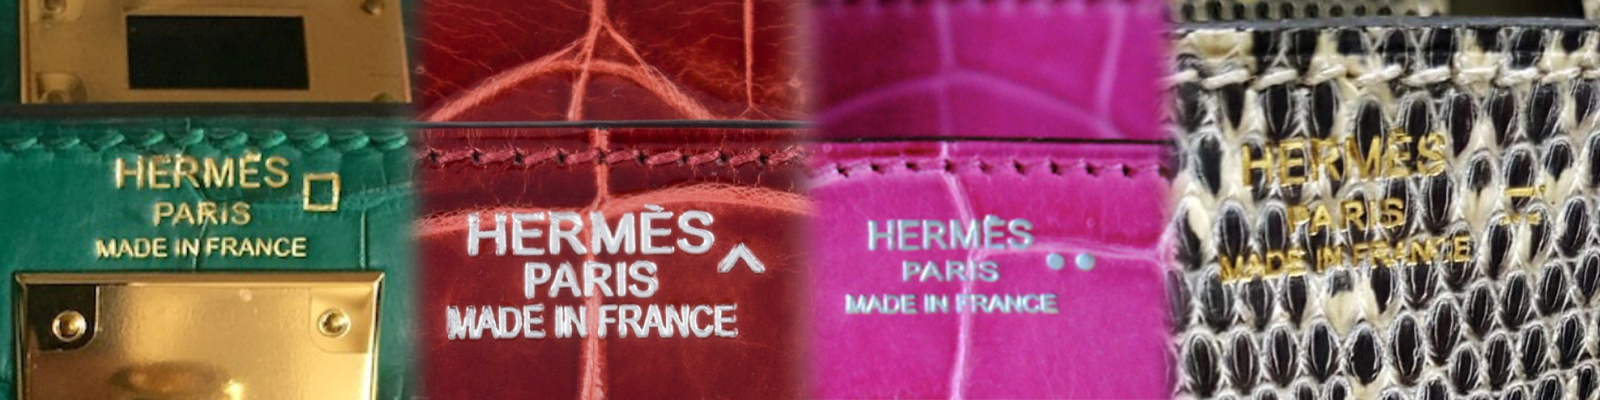 EVERYTHING YOU NEED TO KNOW ABOUT HERMES DATE STAMPS